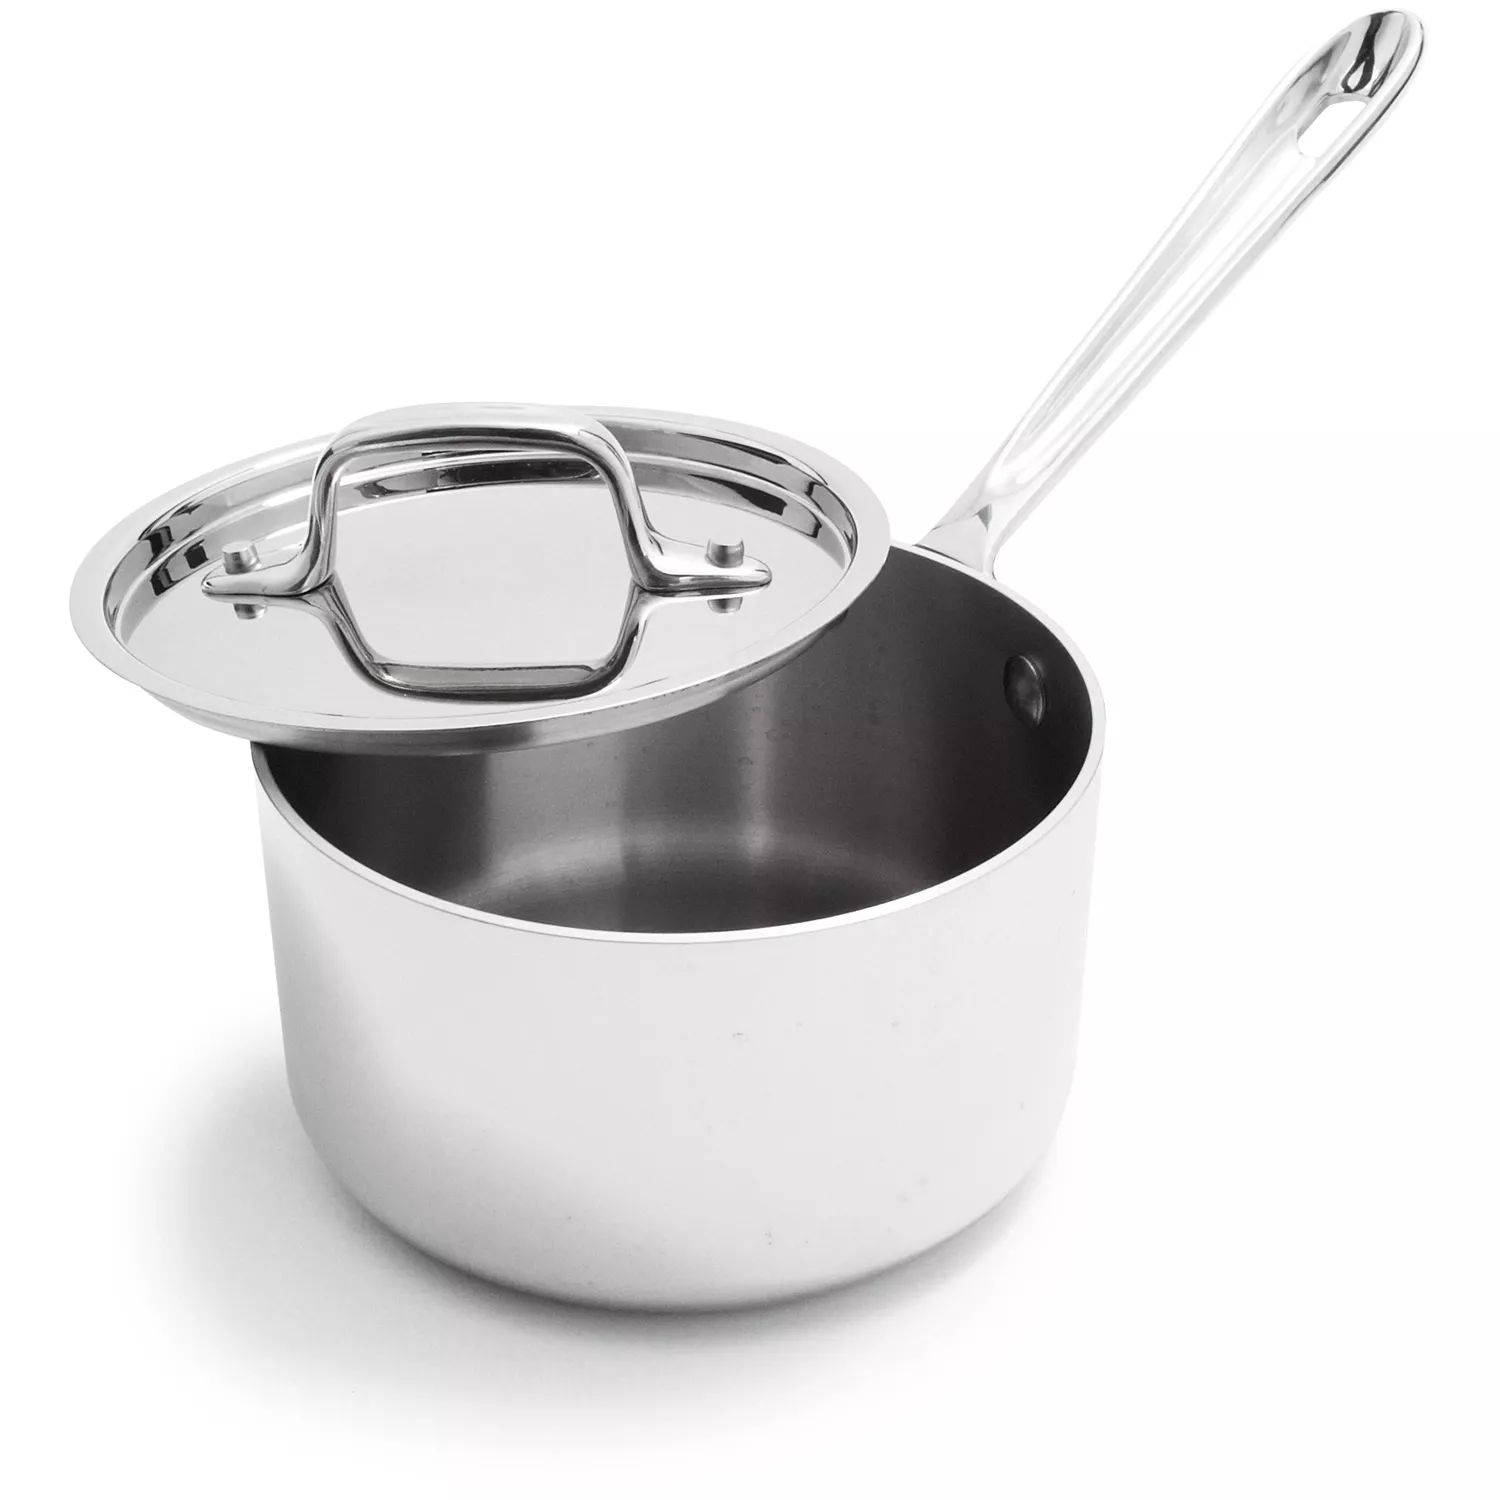 All-Clad D3 Stainless Steel Saucepan with Lid | Sur La Table